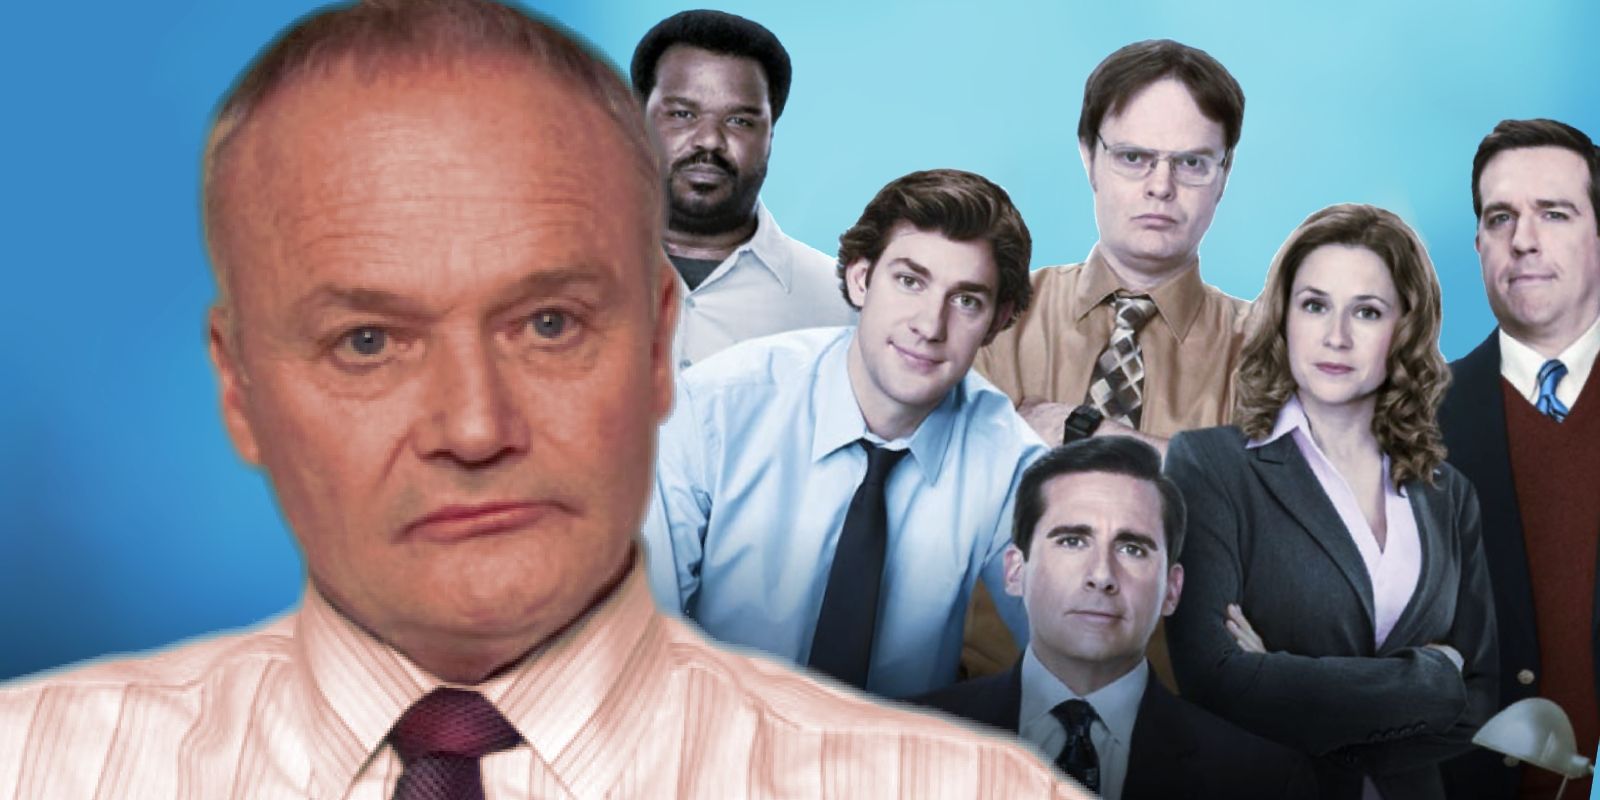 The-office-creed